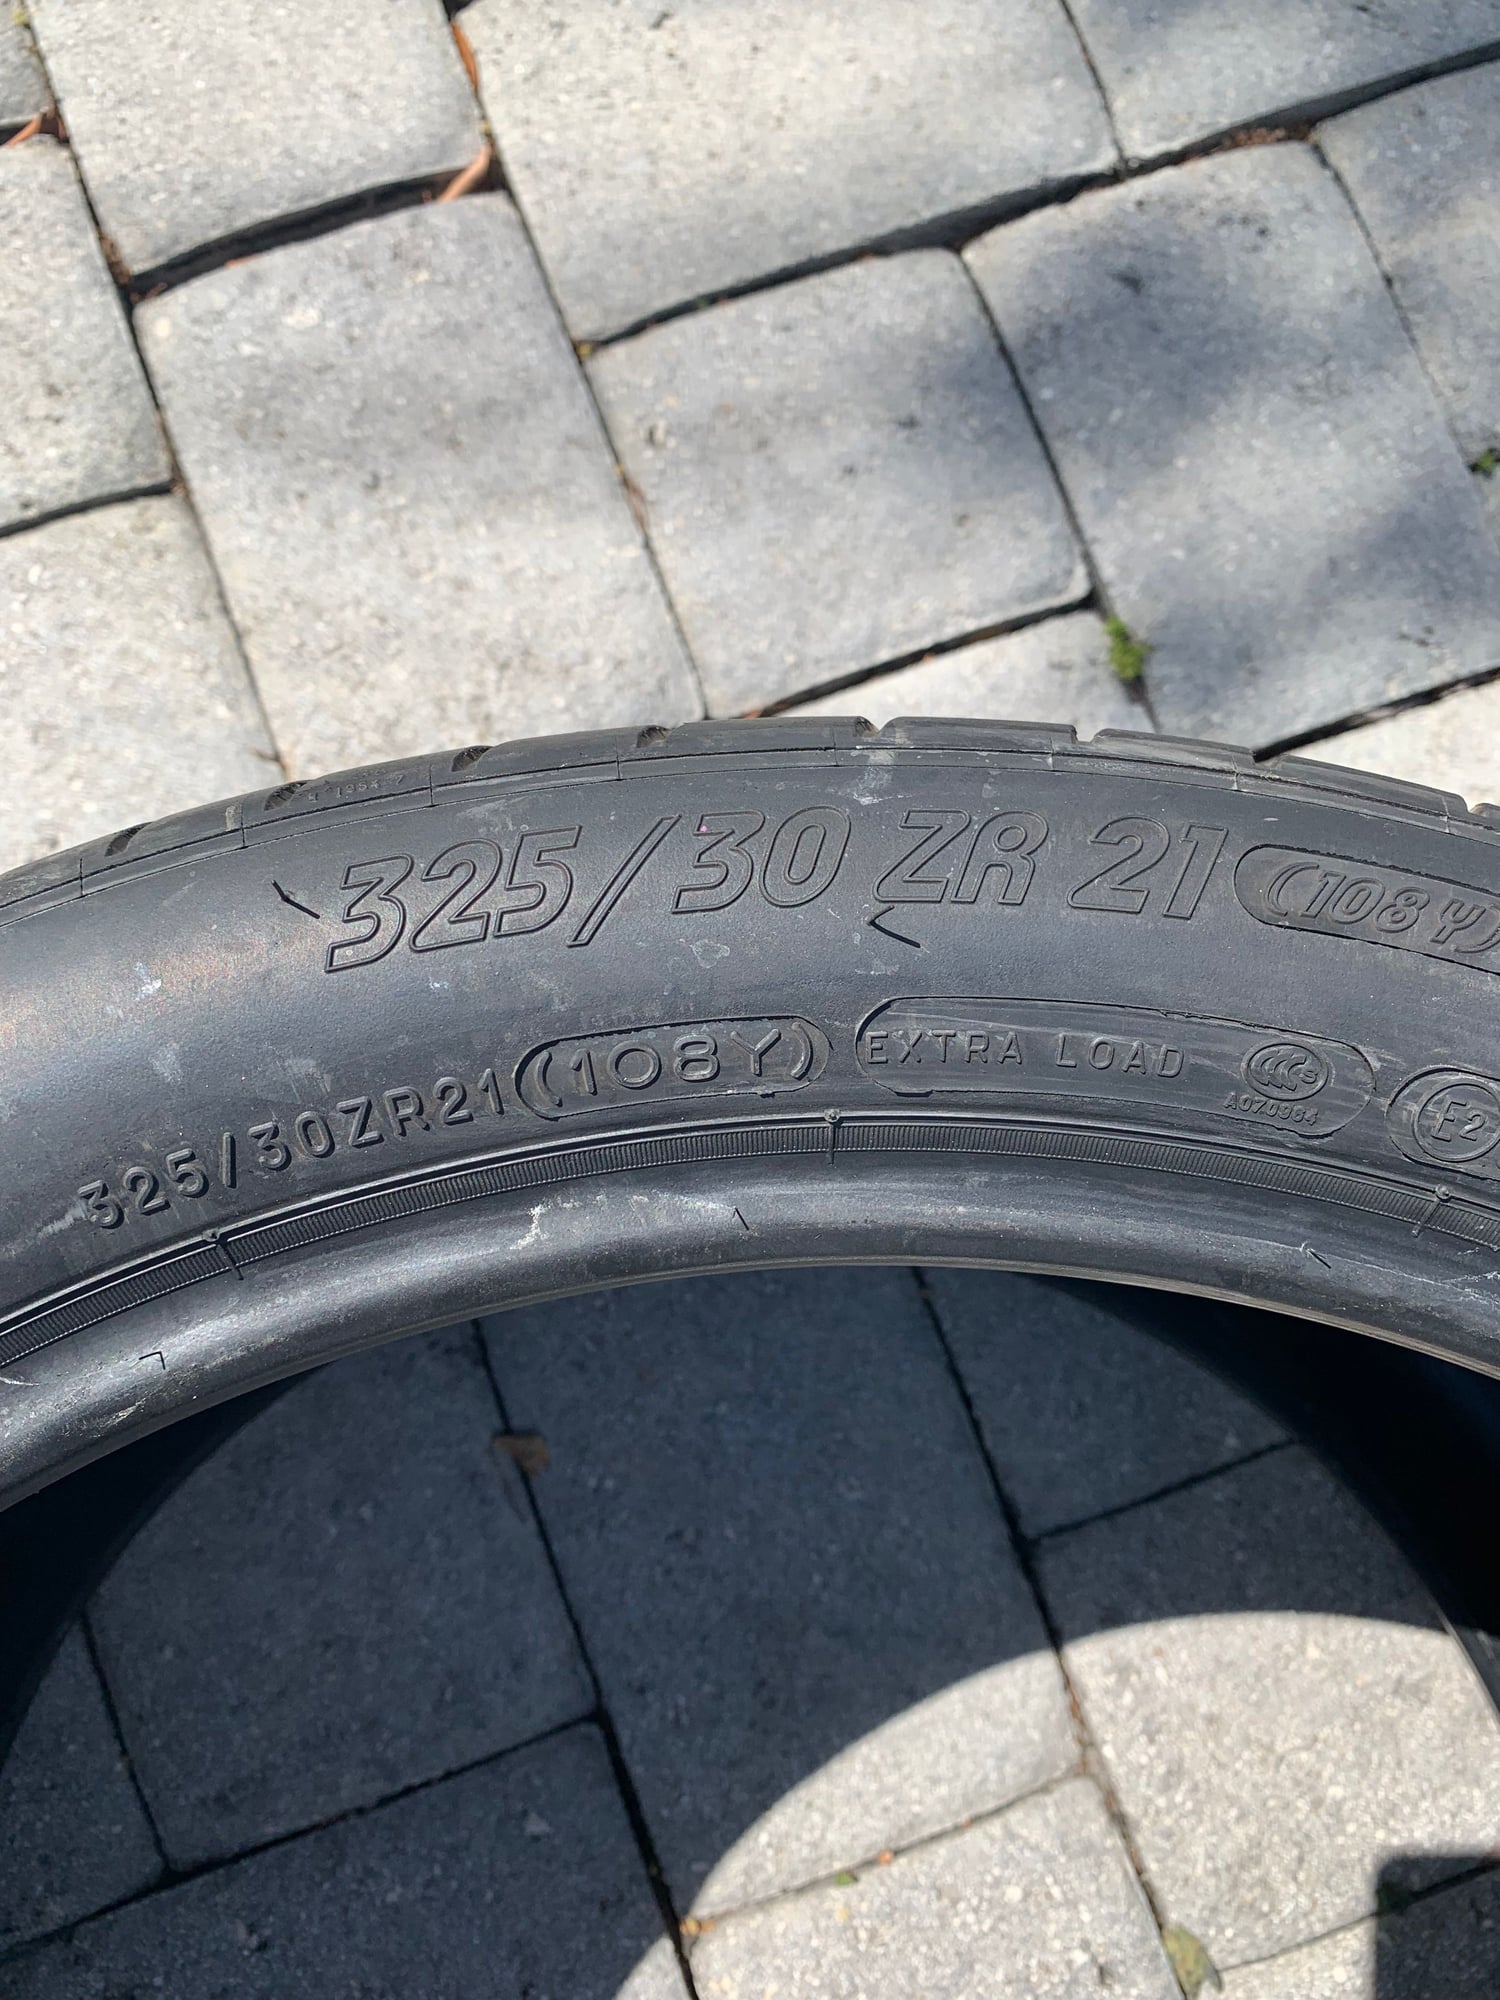 Wheels and Tires/Axles - Michelin Cup 2 tires for GT3RS wheels - Used - 2014 to 2019 Porsche GT3 - West Palm Beach, FL 33410, United States